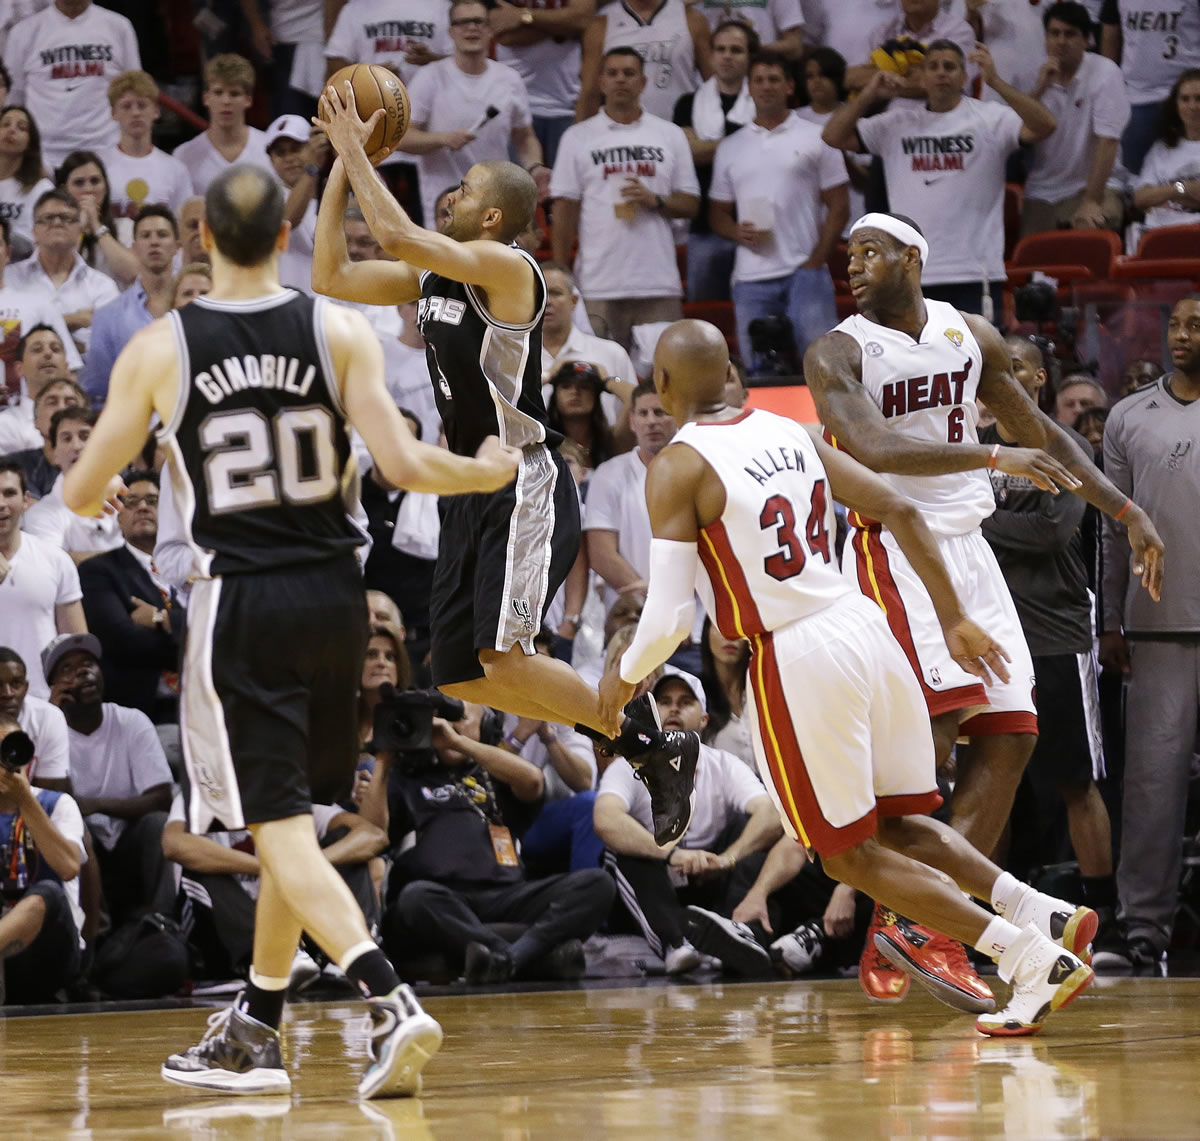 San Antonio Spurs point guard Tony Parker (9) makes the final shot of the game against the Miami Heat during the second half of Game 1 of the NBA Finals basketball game, Thursday, June 6, 2013 in Miami.